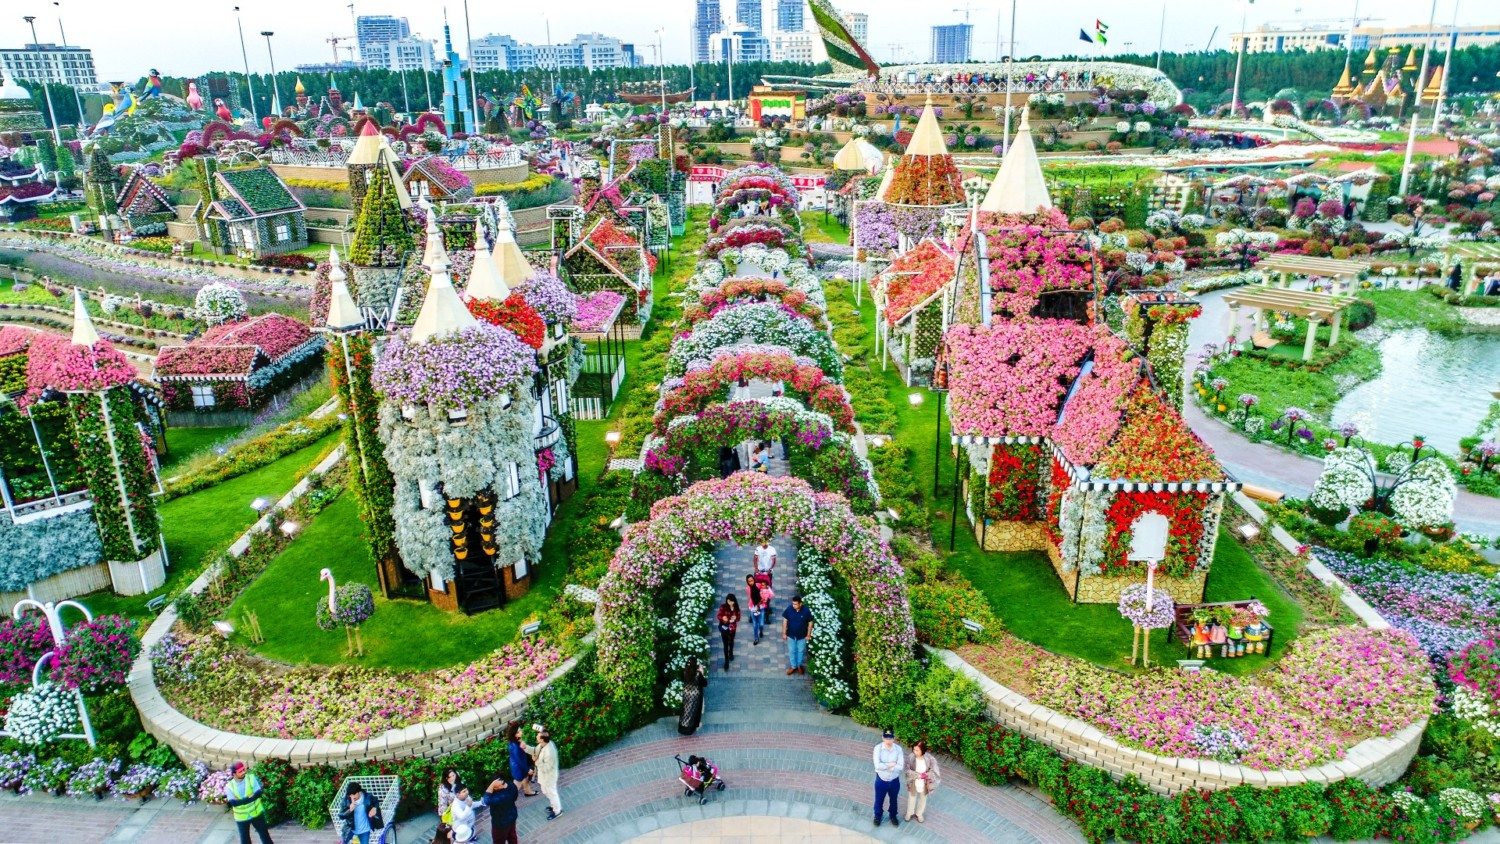 where is the world's largest flower garden? - simplemost